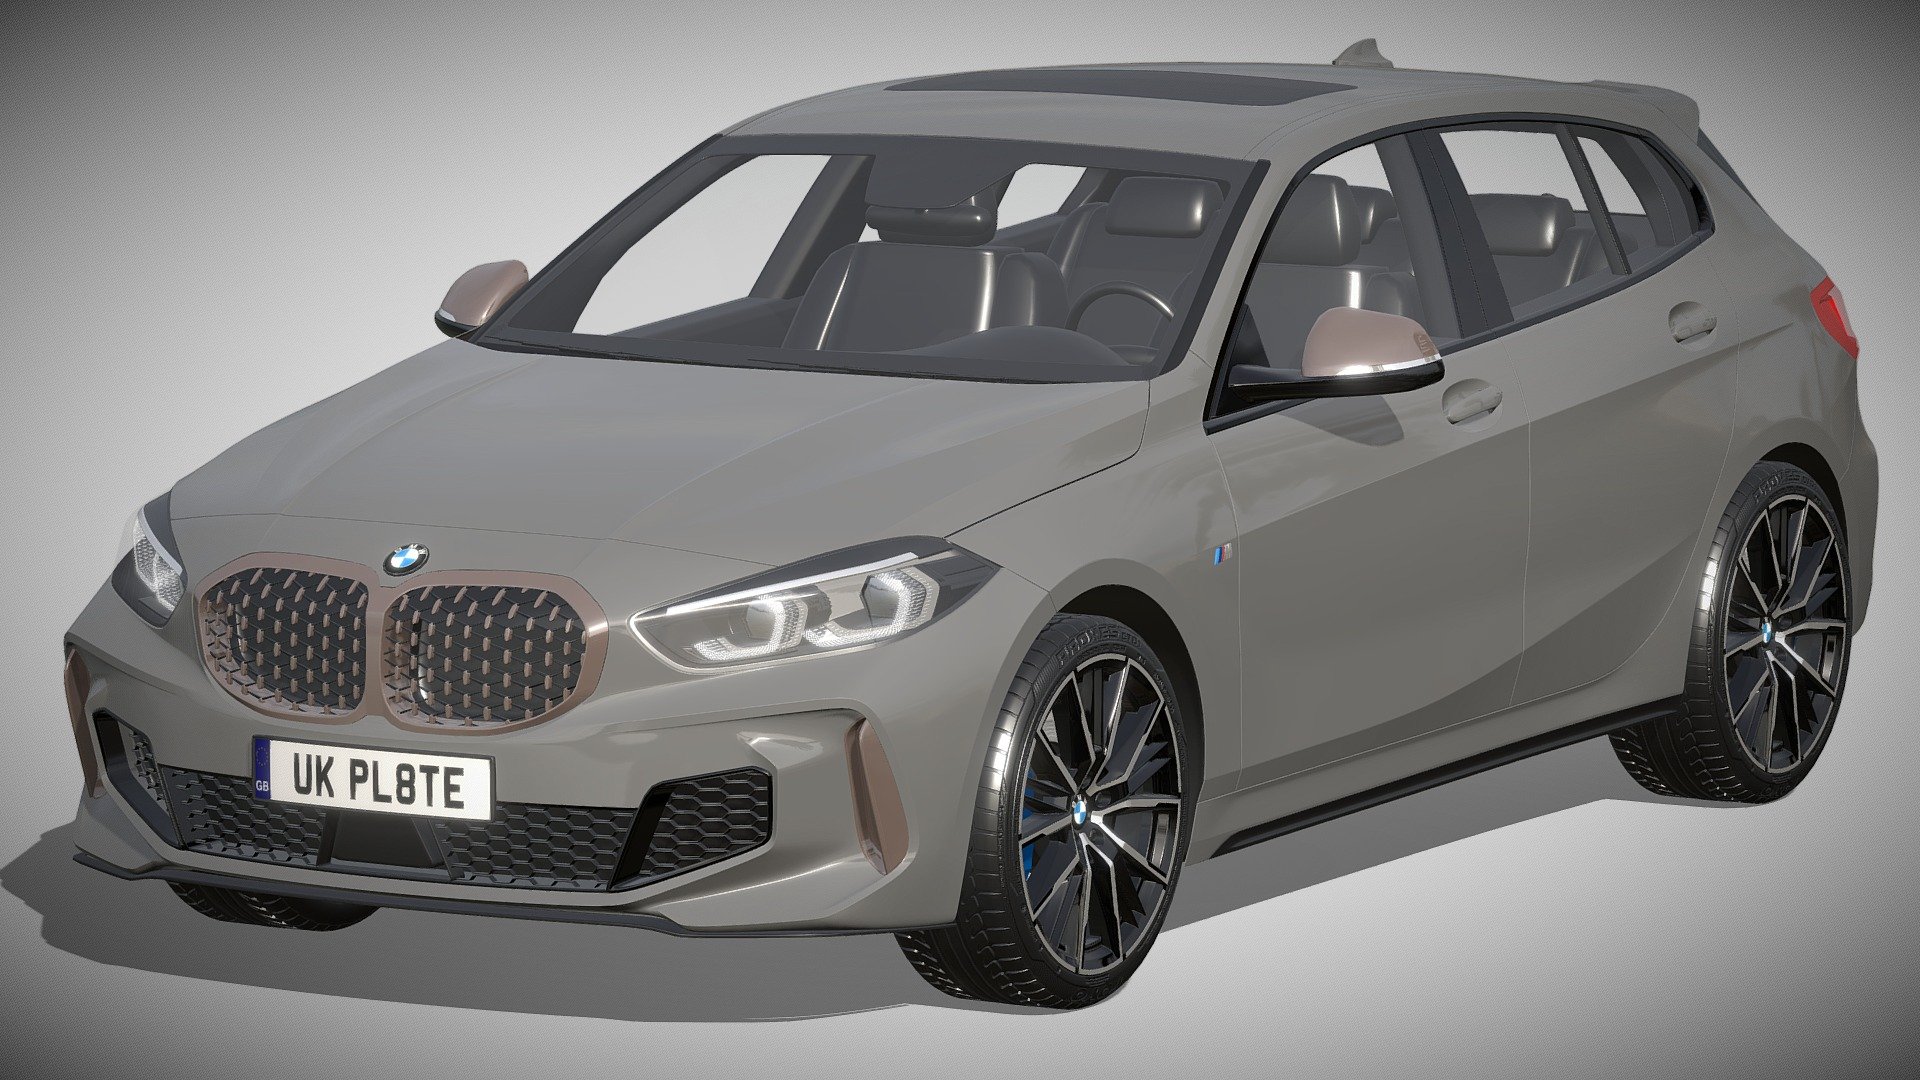 BMW M135i 2022

https://www.bmw.de/de/neufahrzeuge/m/m135i/2021/bmw-m135i-inspirieren.html

Clean geometry Light weight model, yet completely detailed for HI-Res renders. Use for movies, Advertisements or games

Corona render and materials

All textures include in *.rar files

Lighting setup is not included in the file! - BMW M135i 2022 - Buy Royalty Free 3D model by zifir3d 3d model